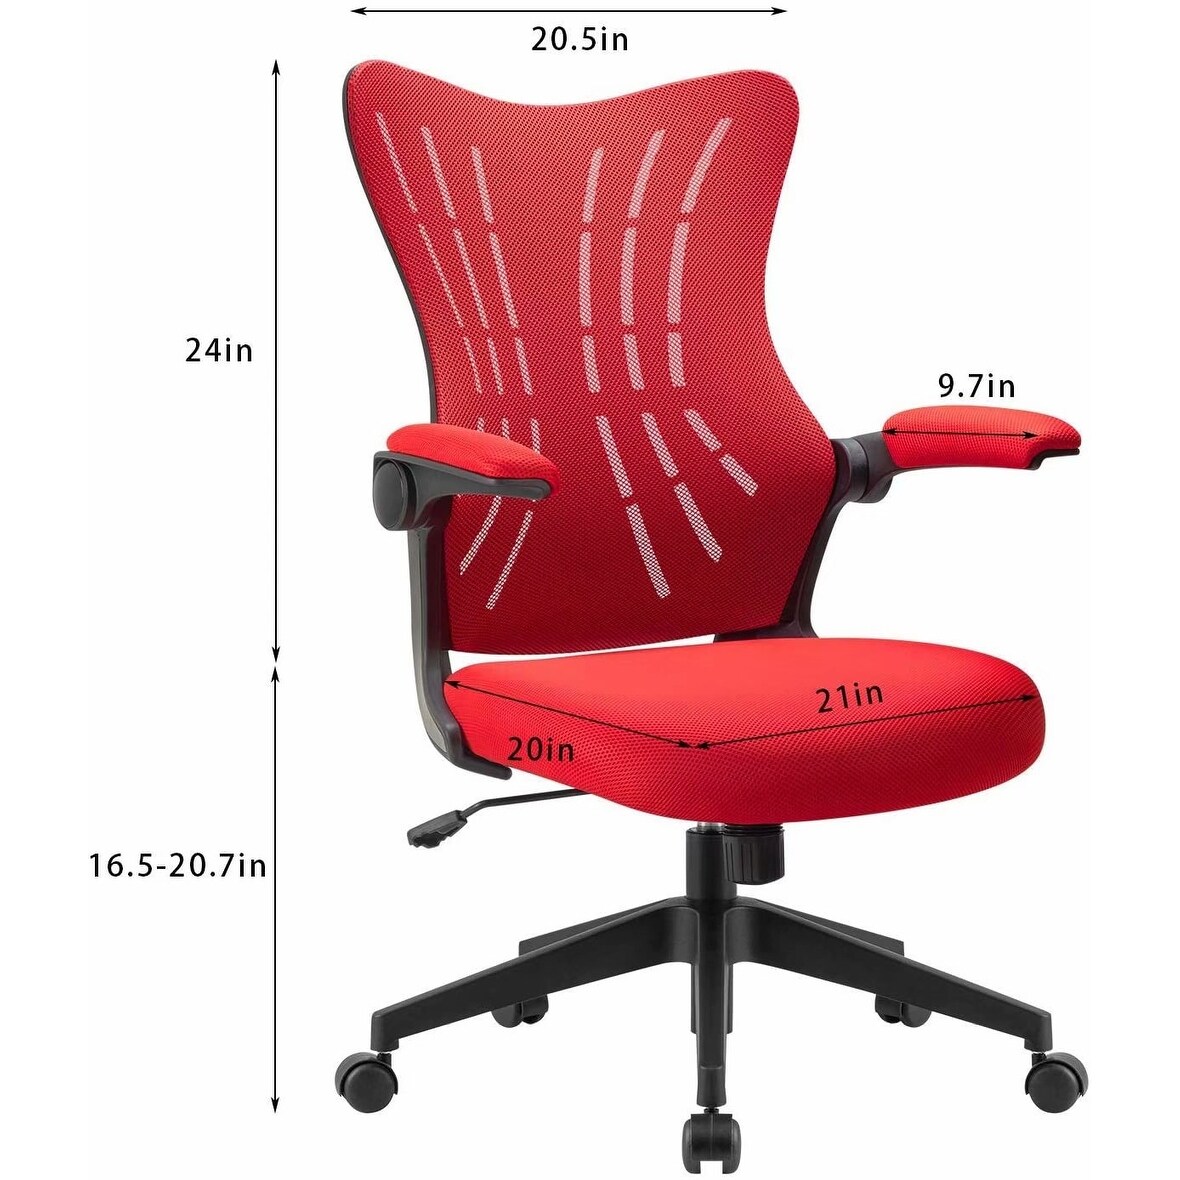 https://ak1.ostkcdn.com/images/products/is/images/direct/c01149f56eb90b8e30f2697003ad19fa37e51271/Homall-Office-Desk-Chair-with-Flip-Arms-Mid-Back-Mesh-Computer-Chair-Swivel-Task-Chair-with-Ergonomic-with-Lumbar-Support.jpg